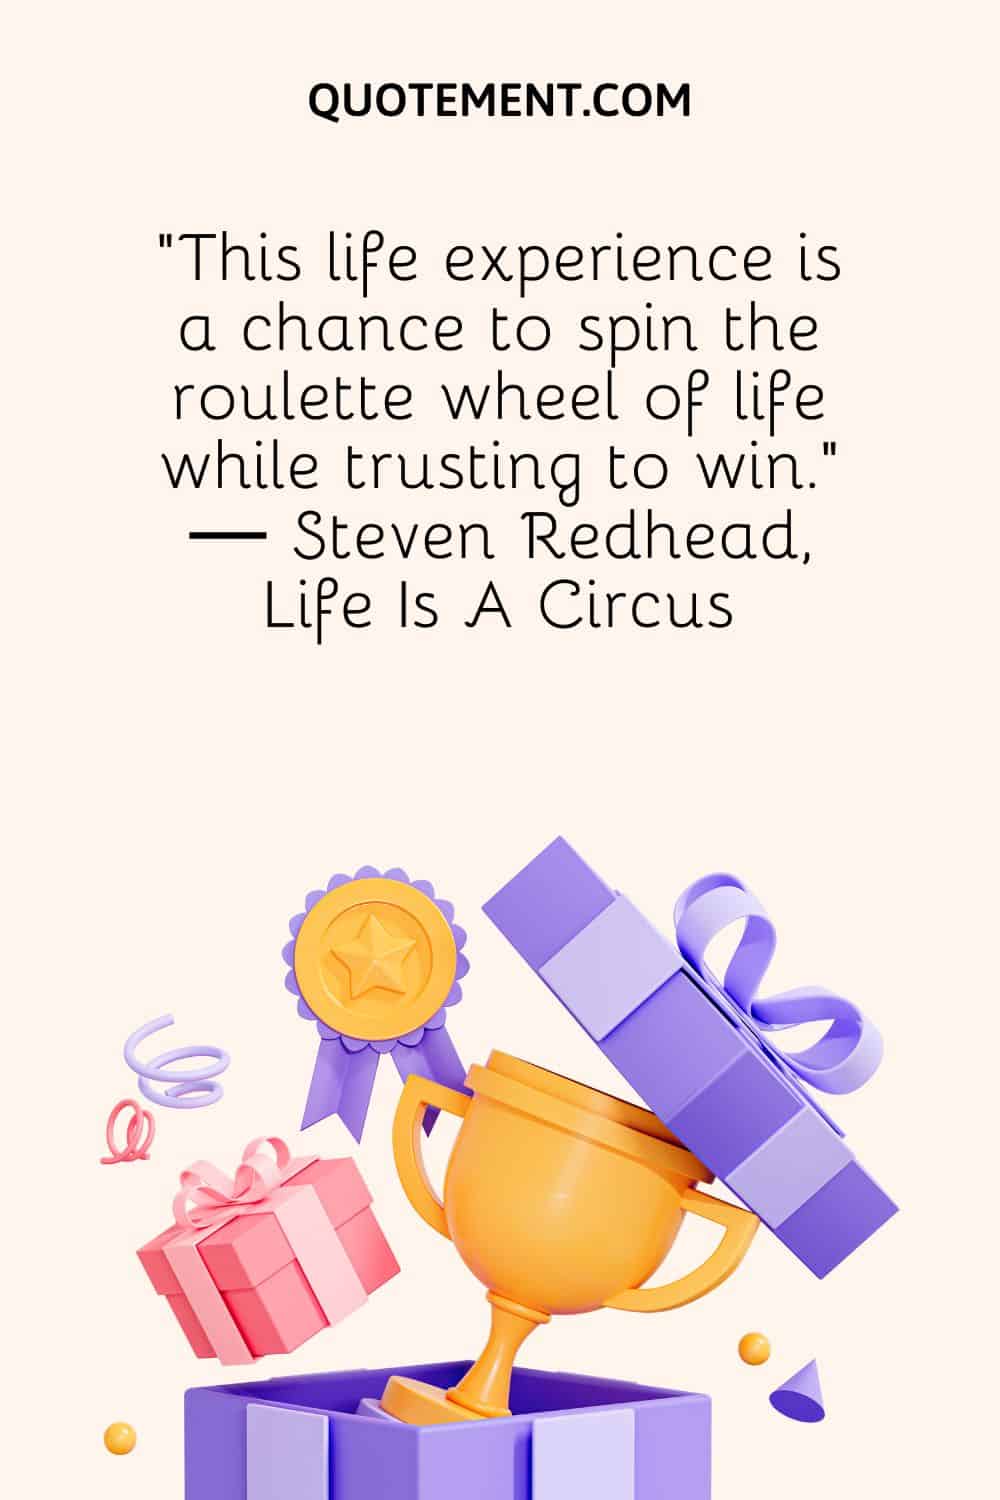 “This life experience is a chance to spin the roulette wheel of life while trusting to win.” ― Steven Redhead, Life Is A Circus